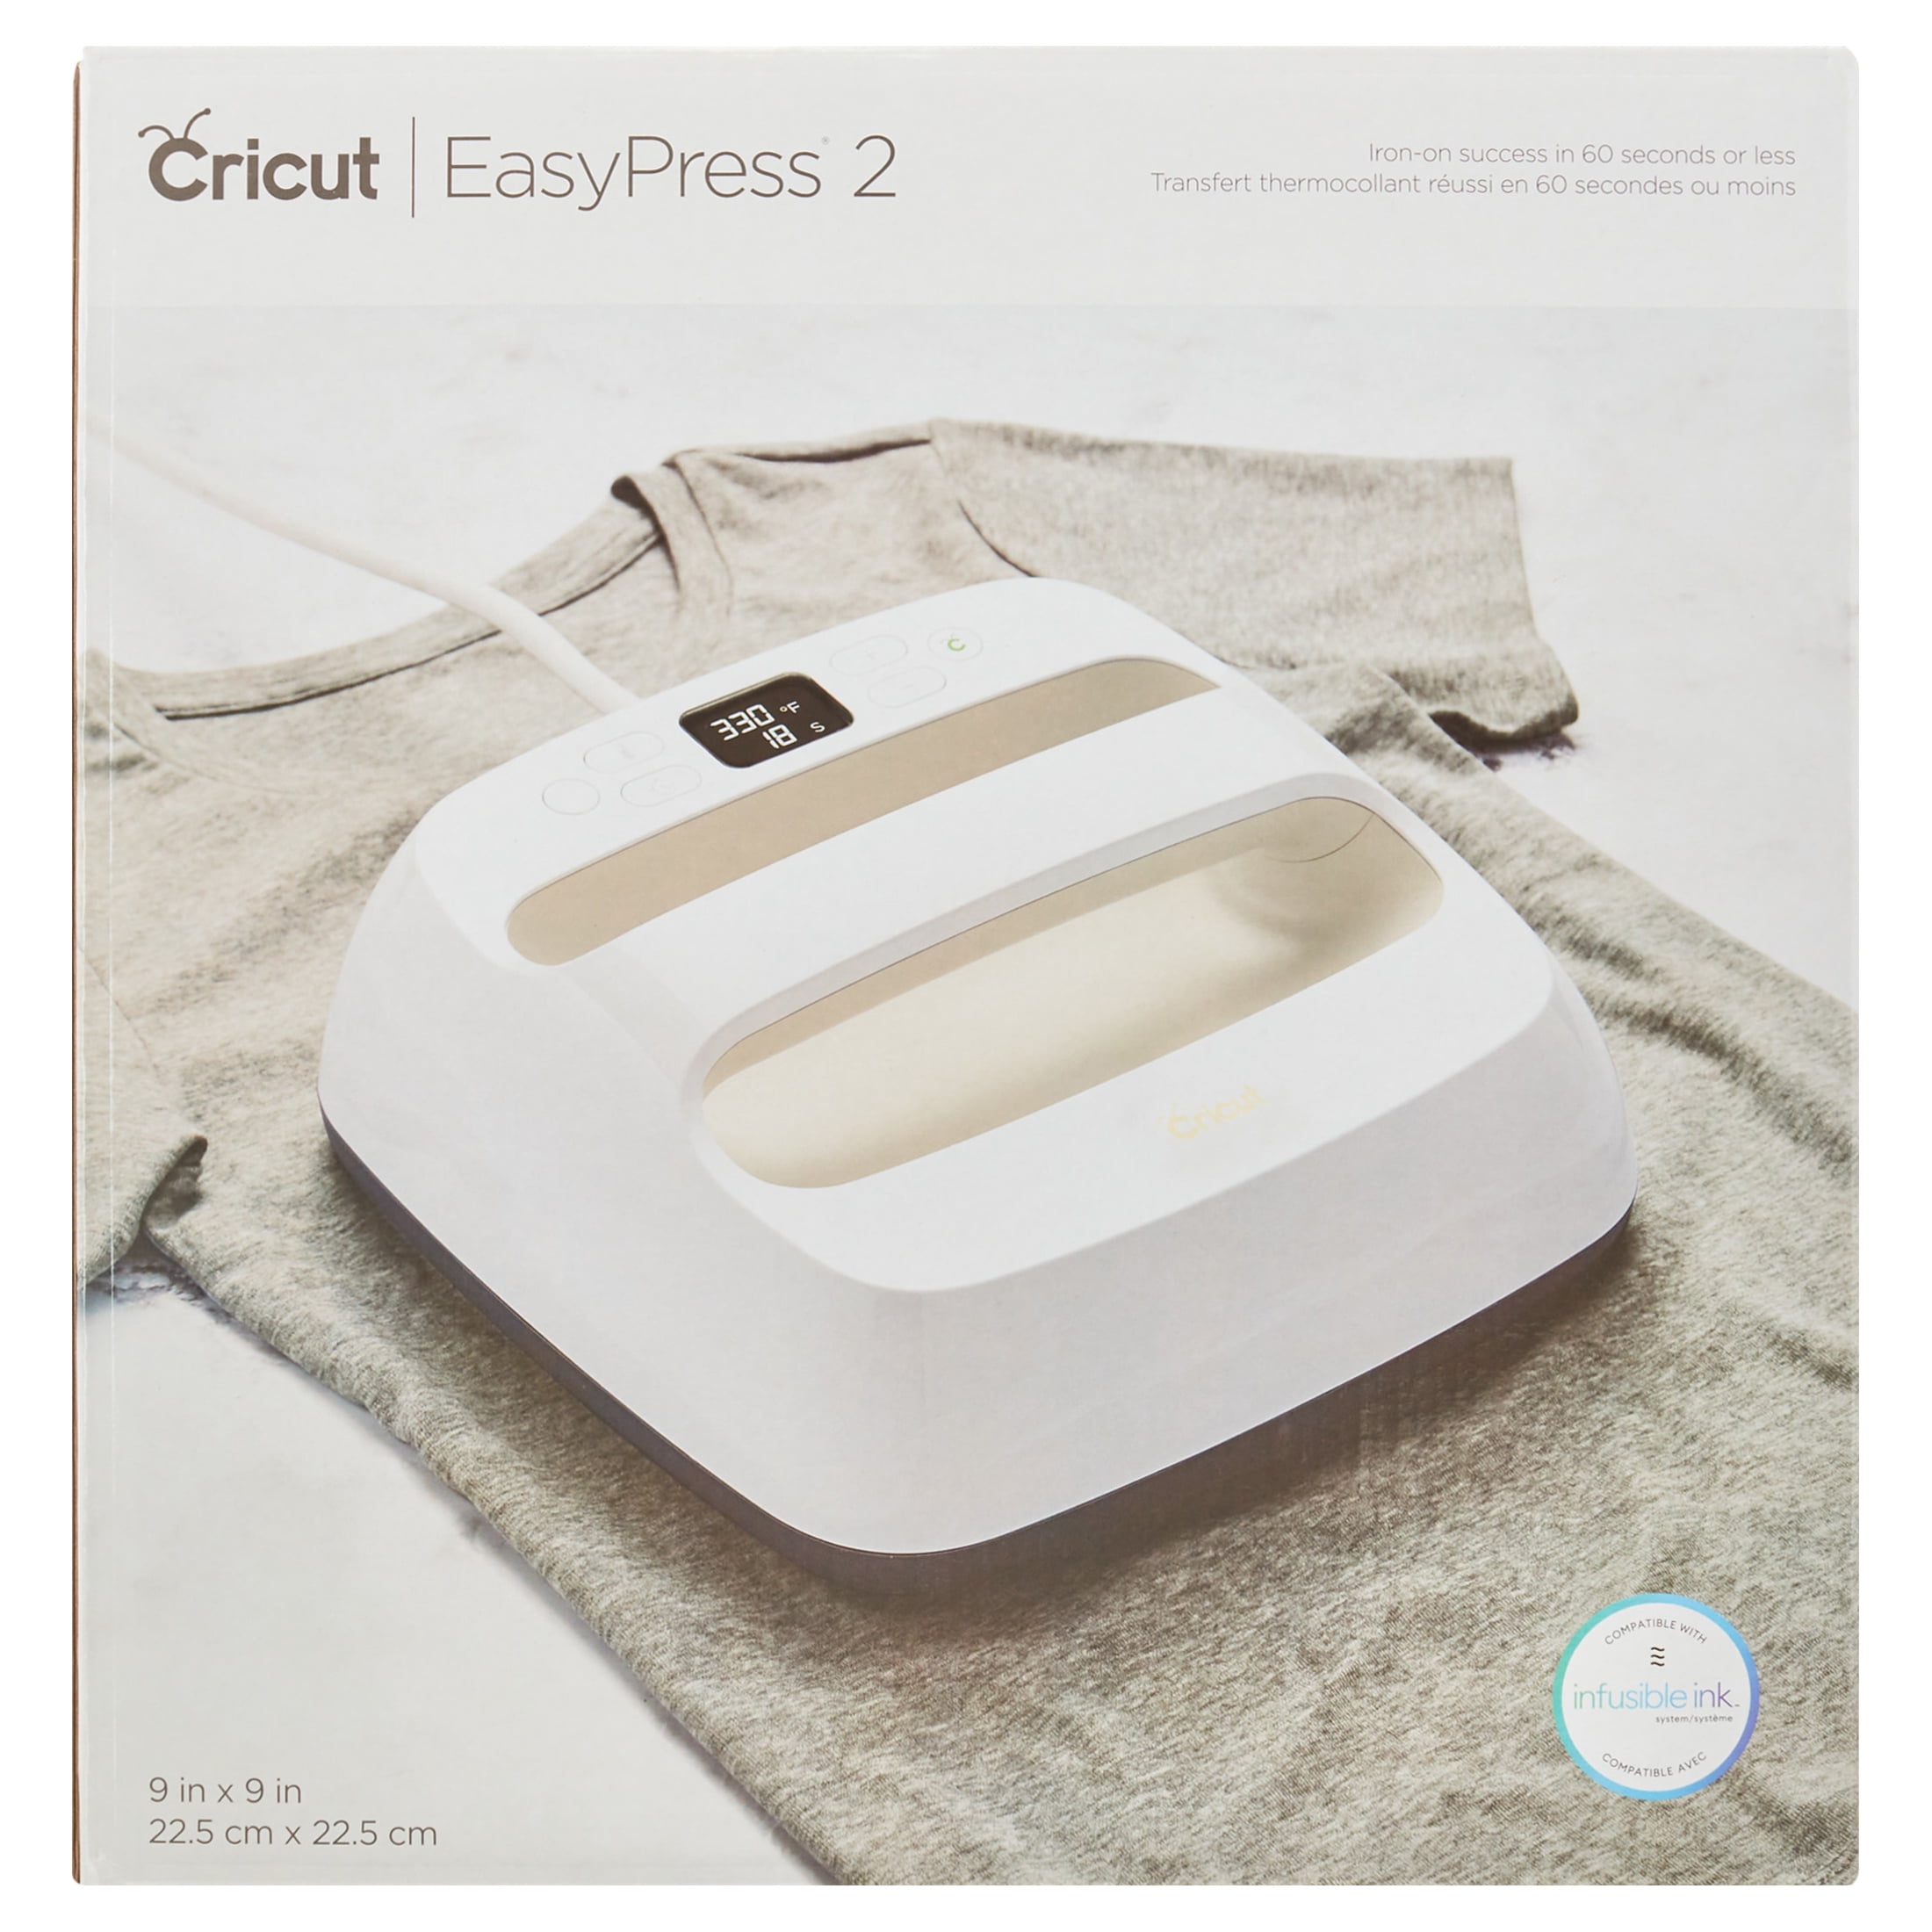 Cricut EasyPress 2 Review  Full Details on The Cricut Iron On Heat Press